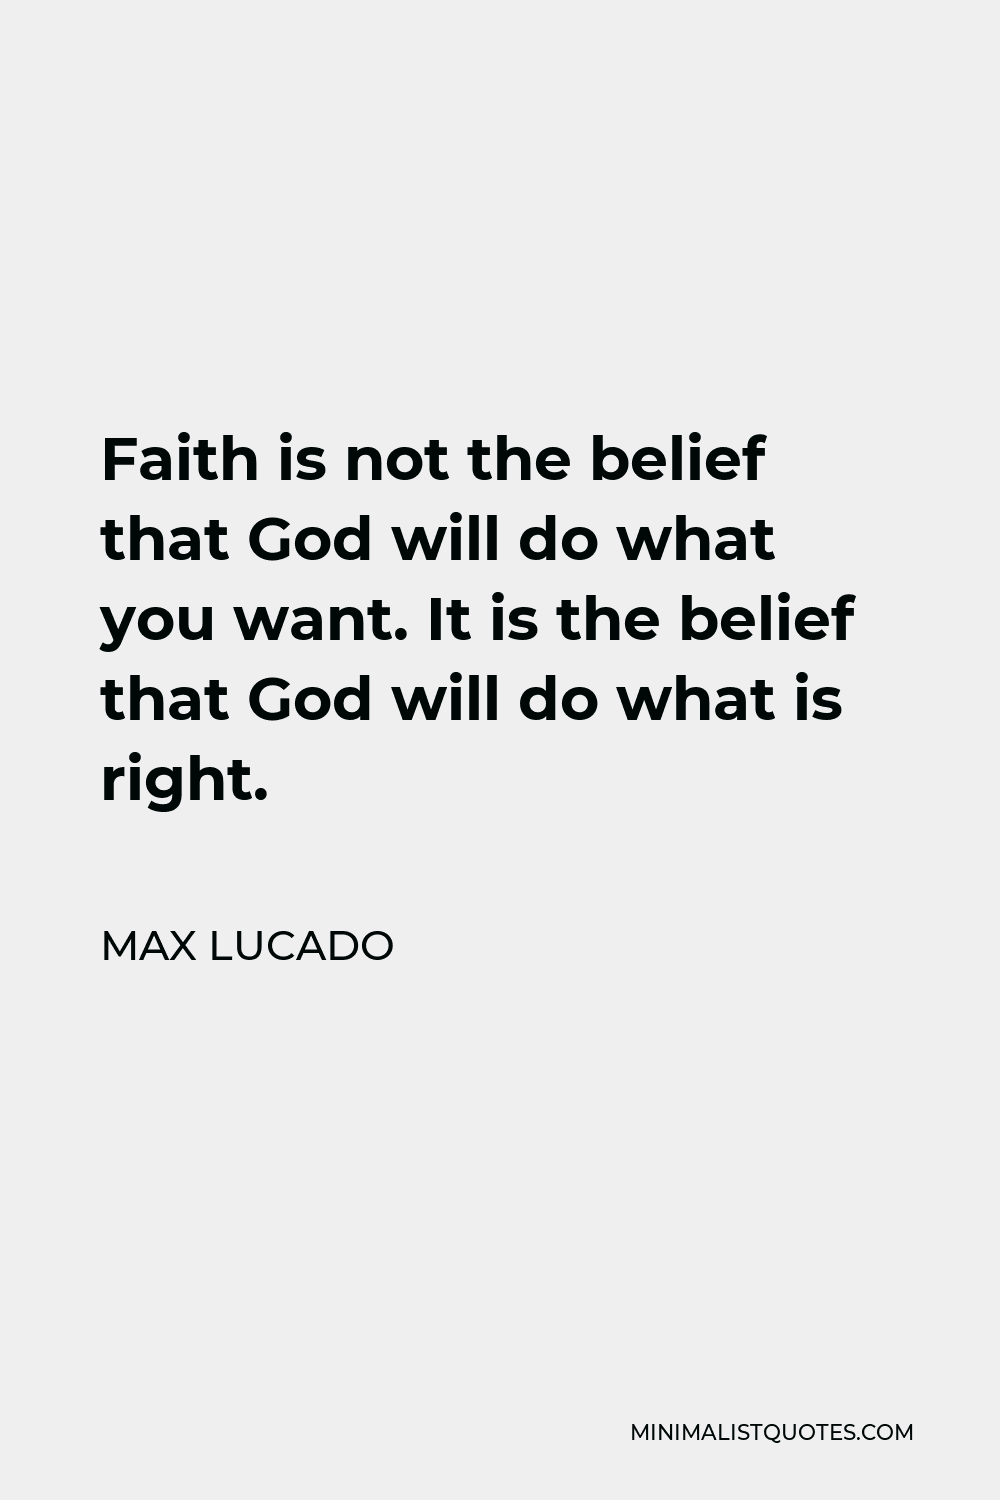 Max Lucado Quote - Faith is not the belief that God will do what you want. It is the belief that God will do what is right.